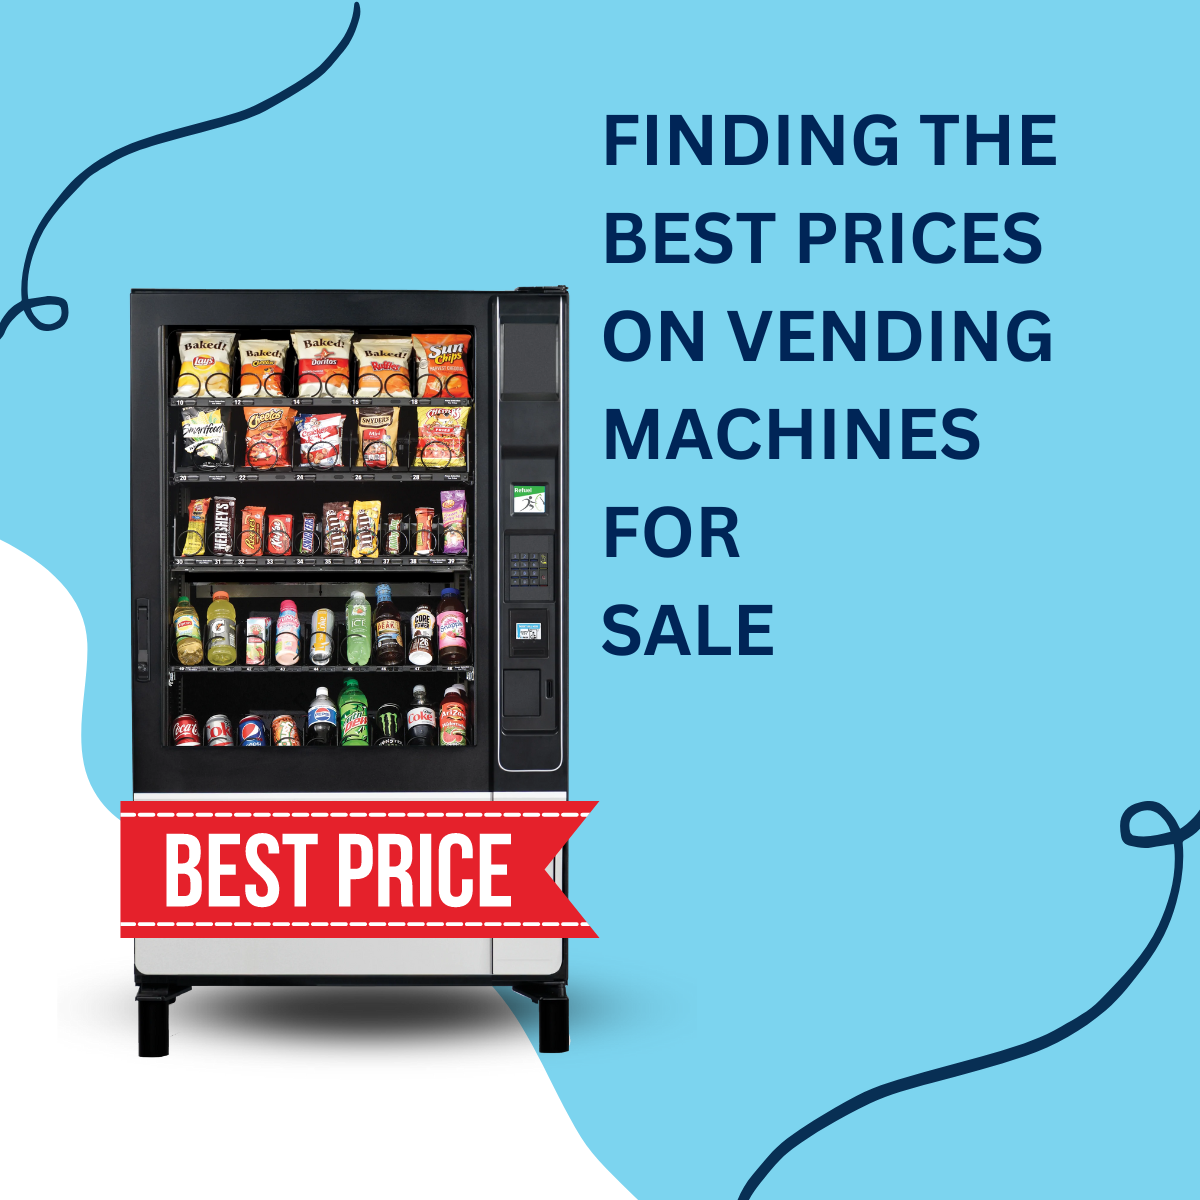 FINDING THE BEST PRICES ON VENDING MACHINES FOR SALE